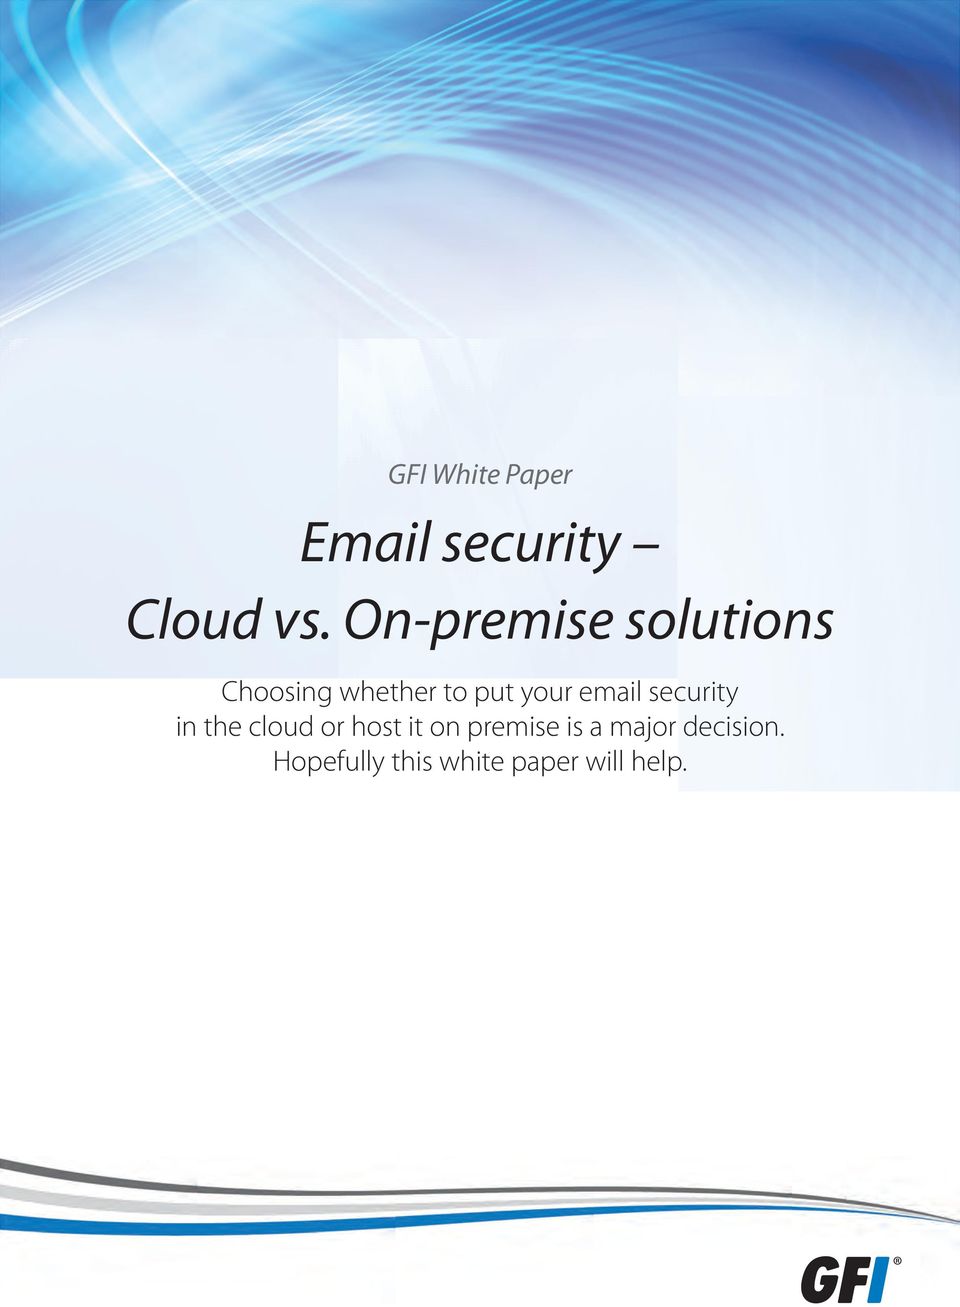 email security in the cloud or host it on premise